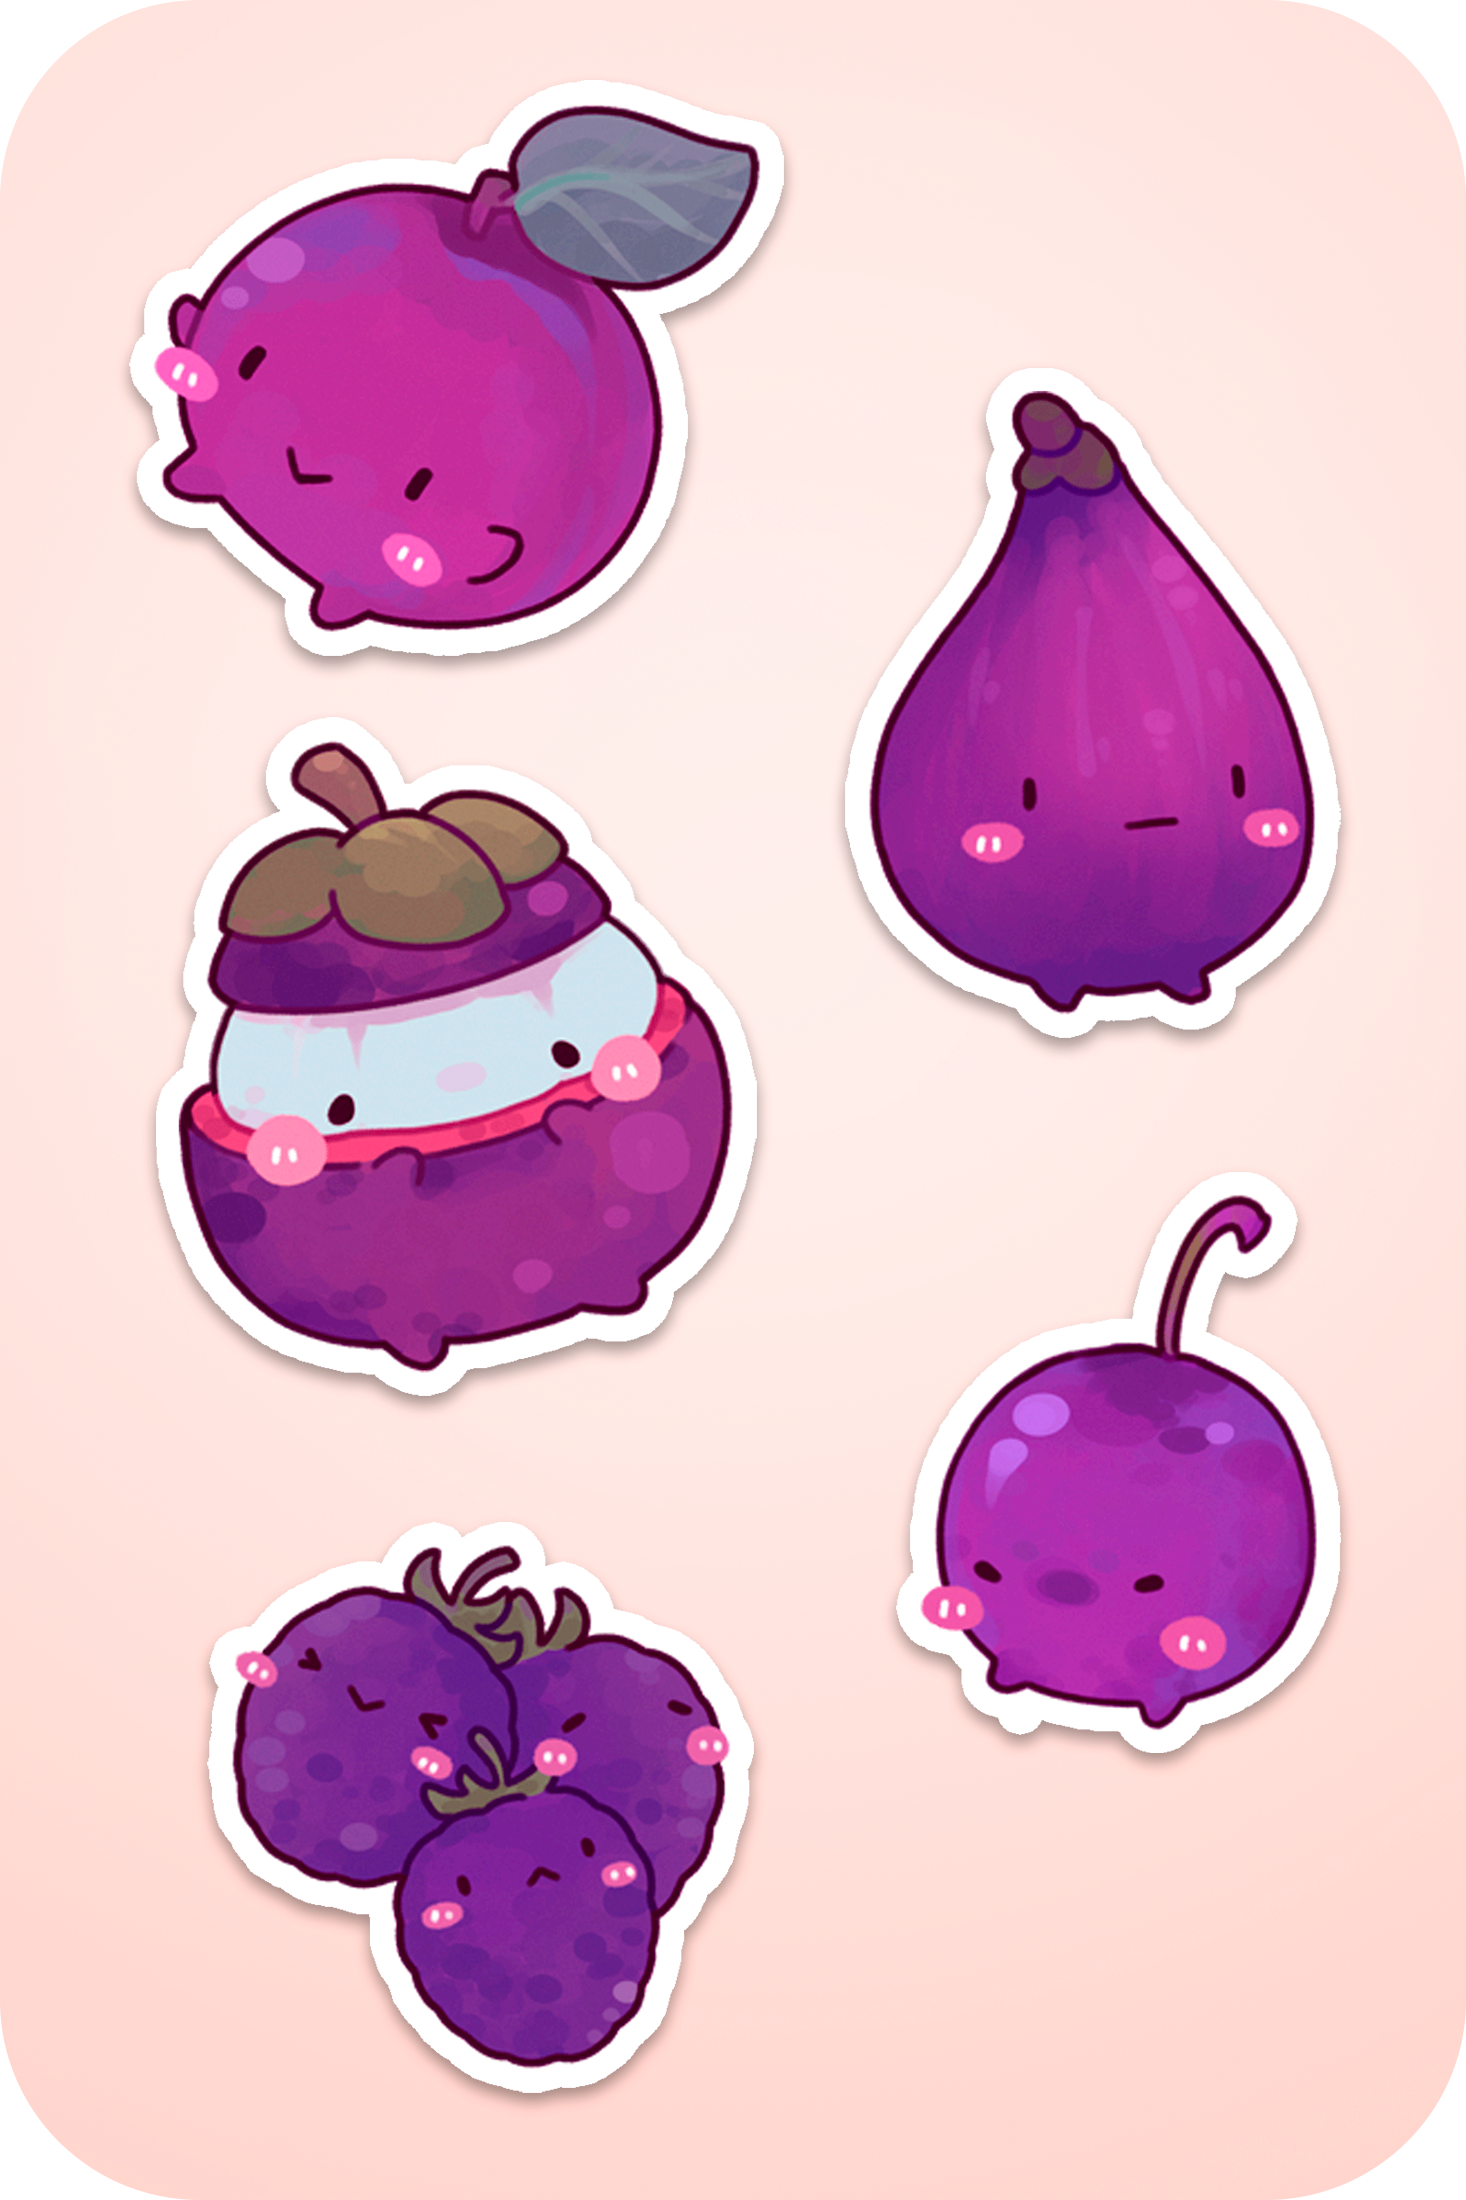 Cute Kawaii MW Drawing Series - A - Fruits and Vegetables Sticker